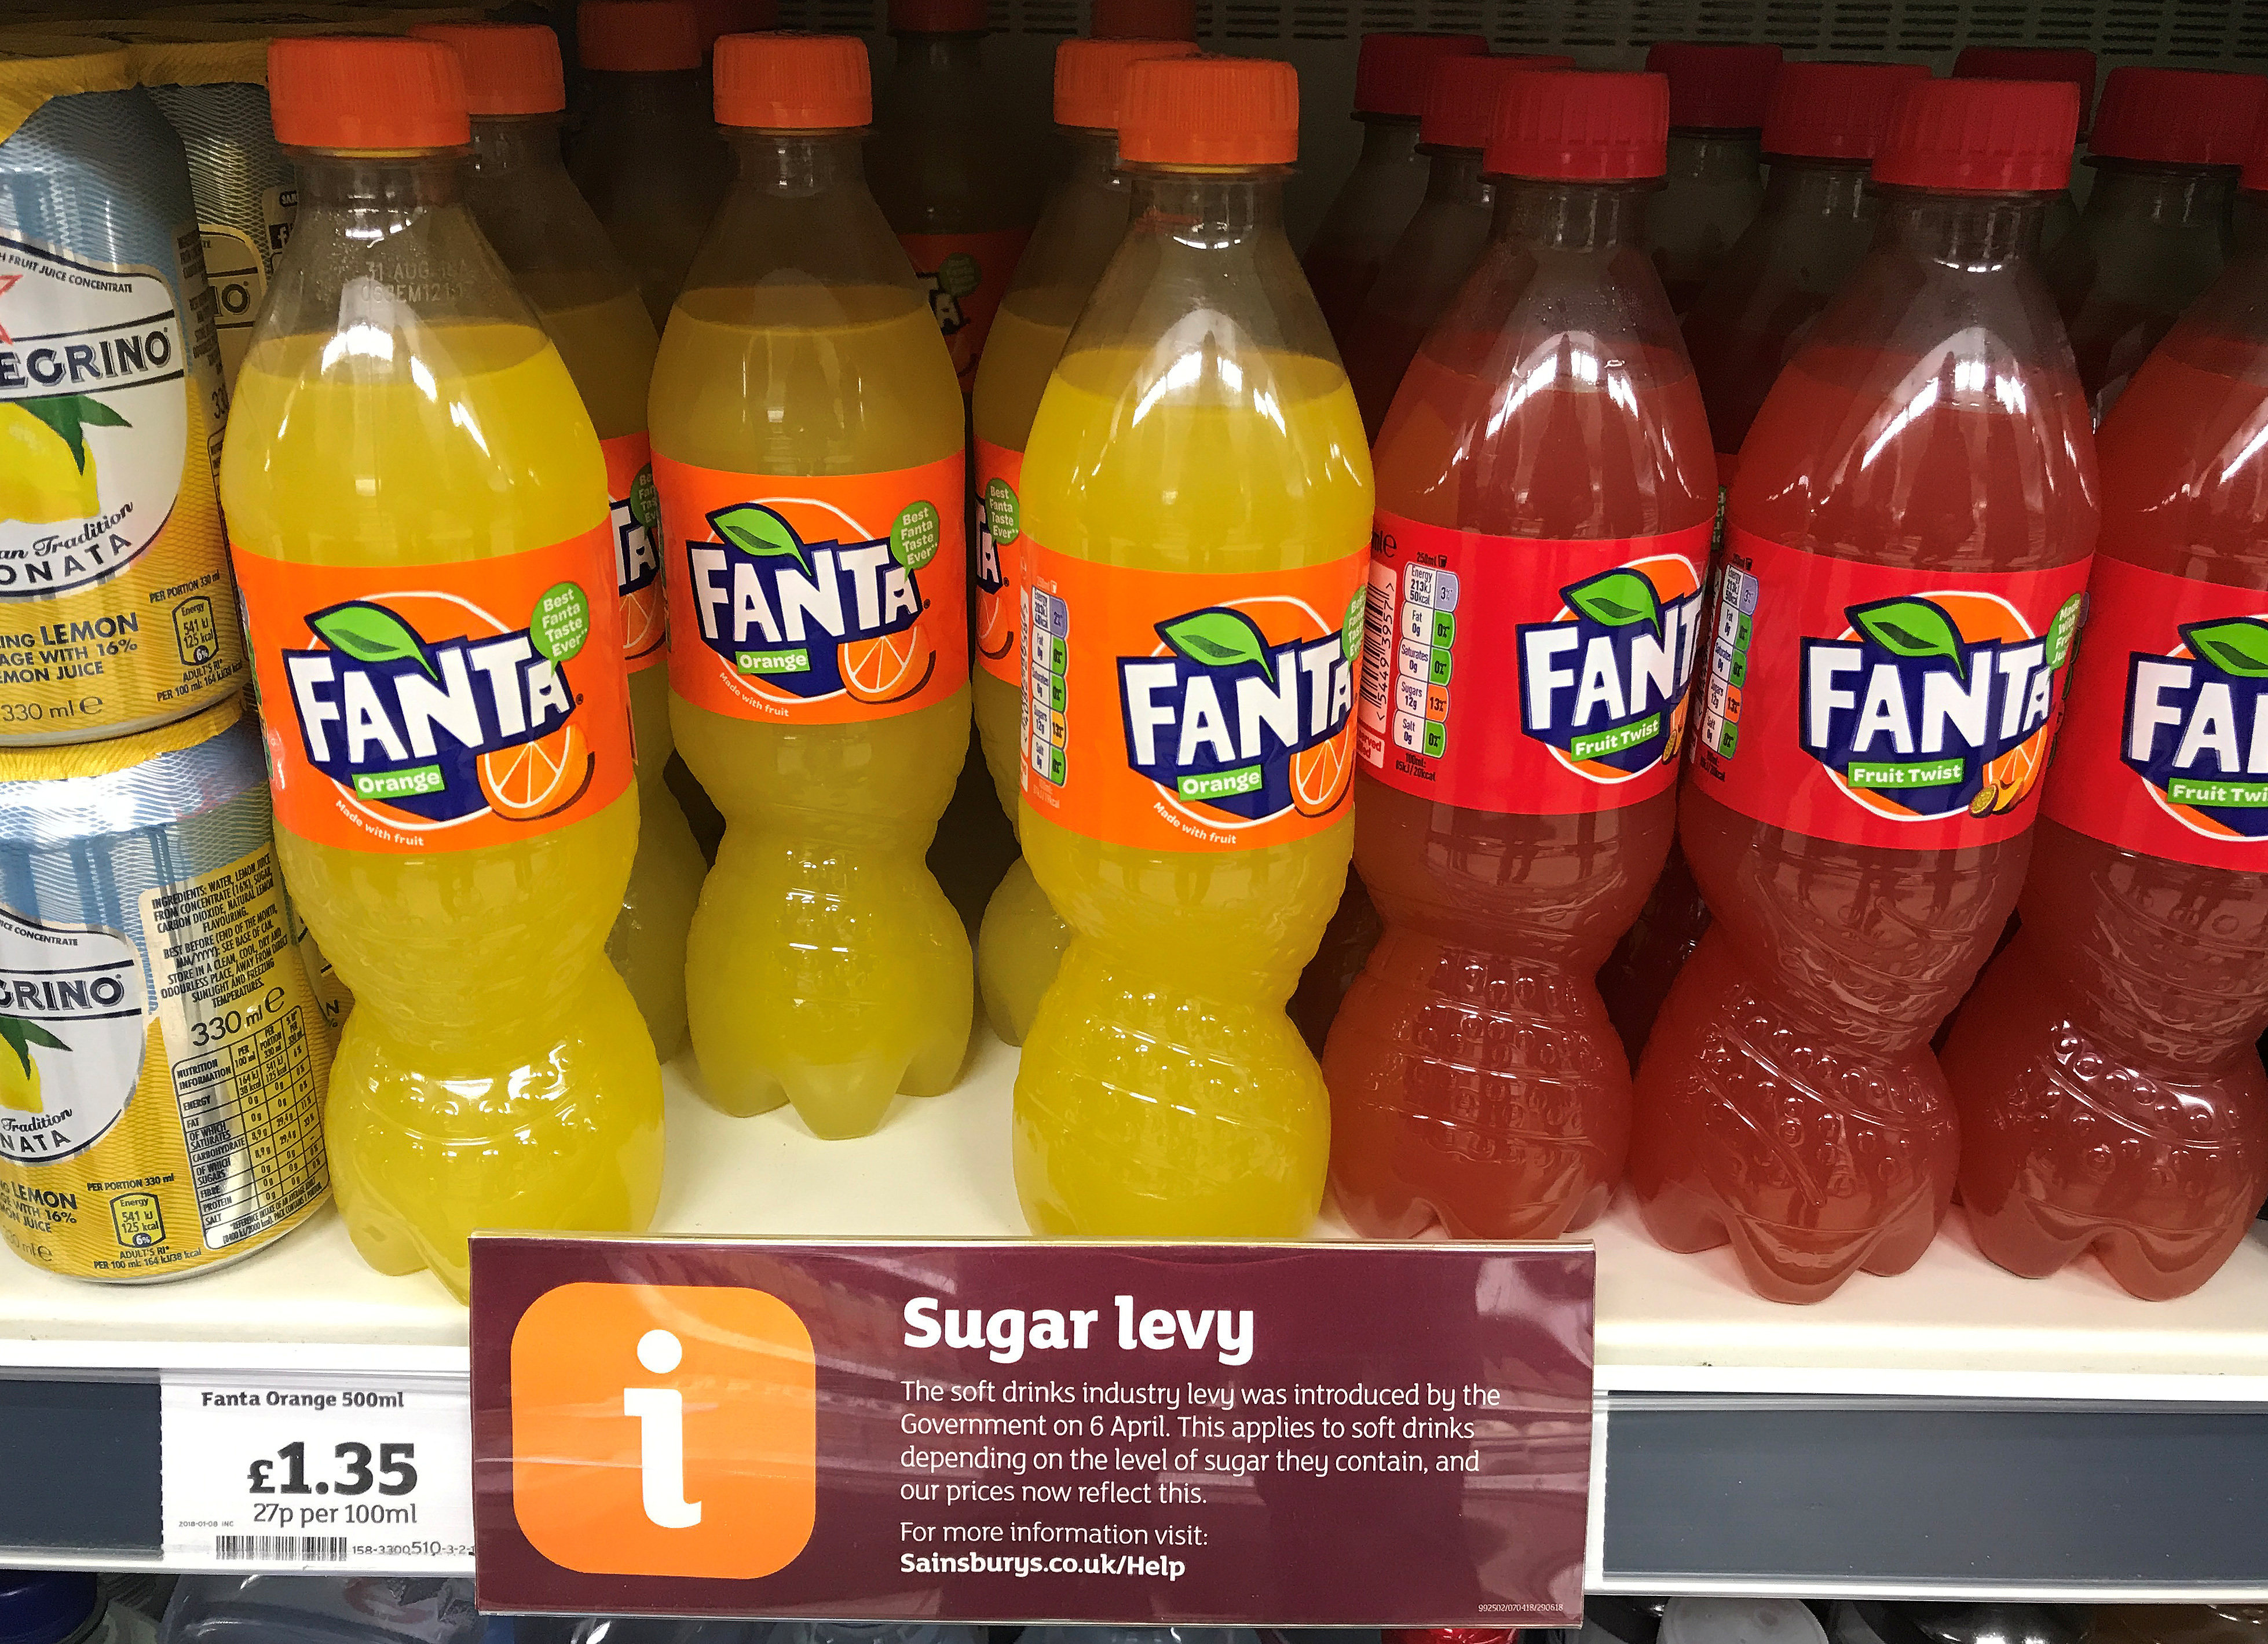 A sign informing shoppers about the UK sugar Levy is seen on a shelf of Fanta soft drinks inside a Sainsbury's supermarket in Manchester.